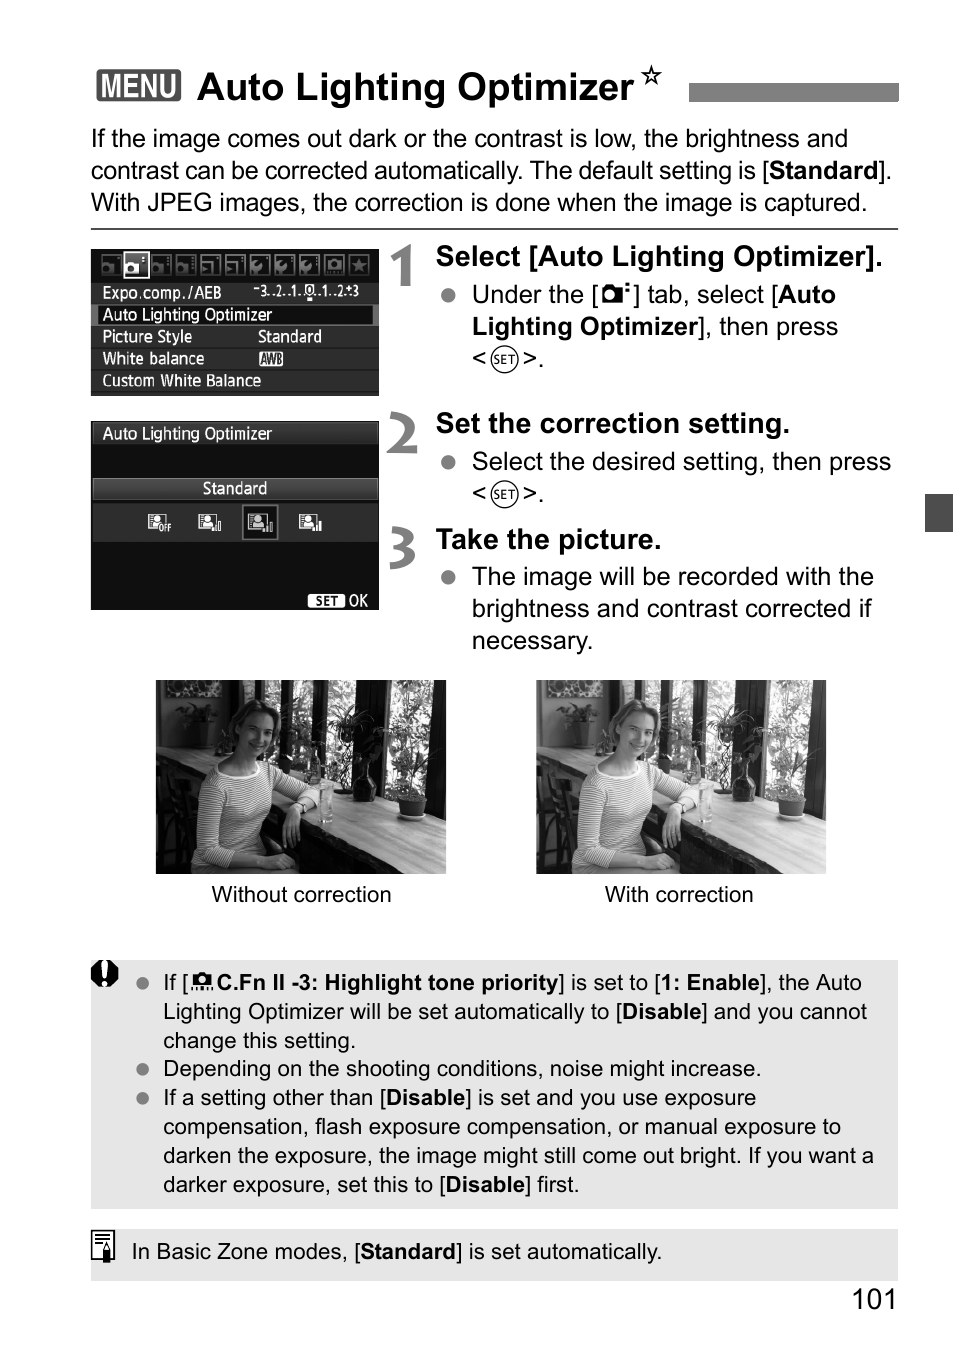 Auto lighting optimizer, 3auto lighting optimizer n | Canon EOS 60D User Manual | Page 101 / 320